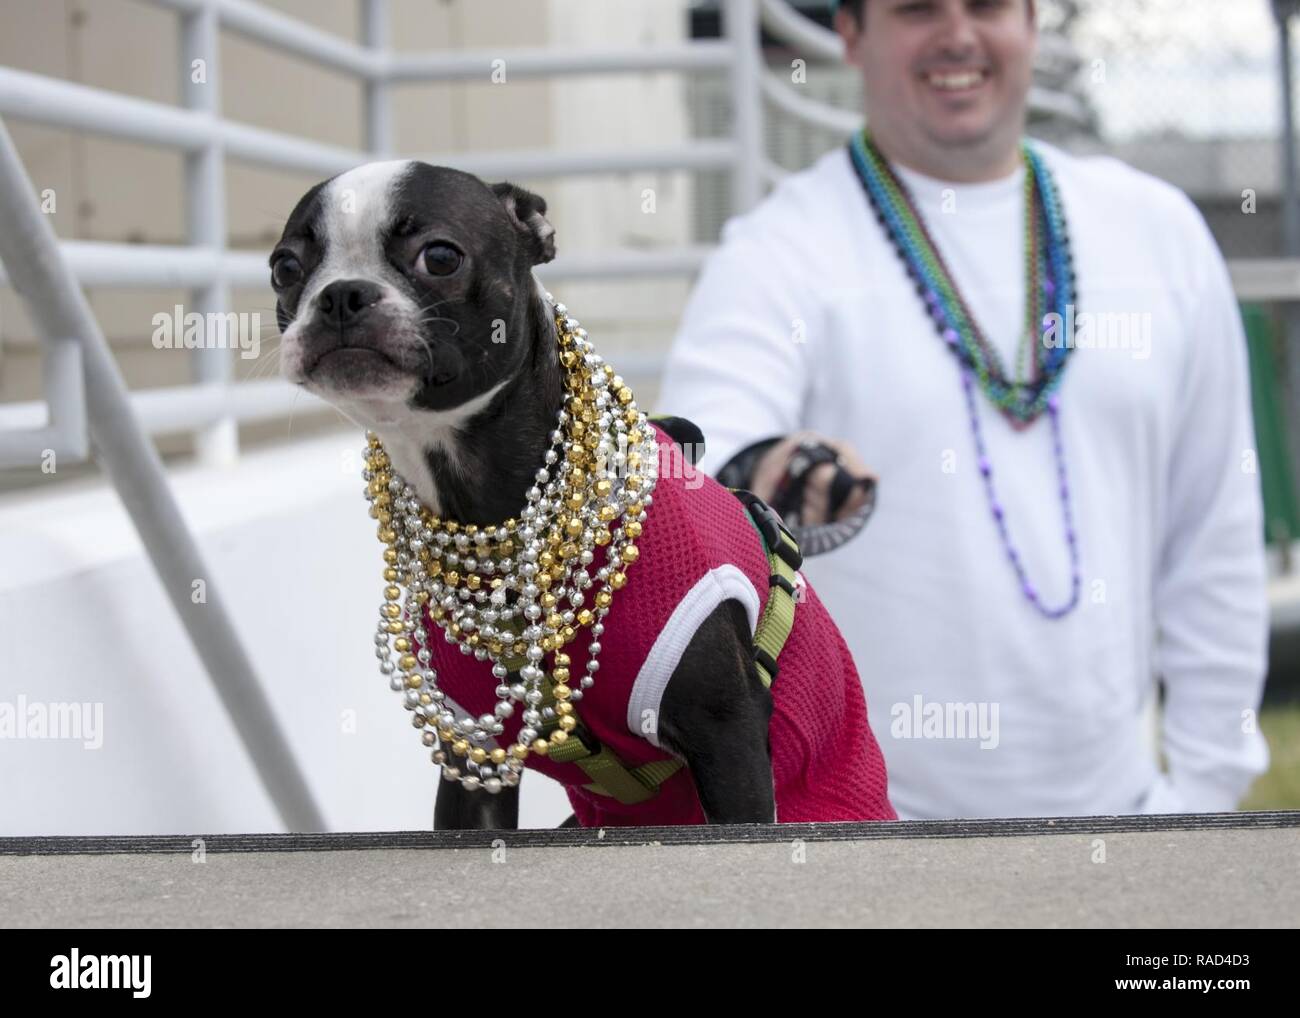 A local dog takes part in the 2017 Jose Gasparilla Pirate Invasion in the Port of Tampa, Fla., Saturday, Jan. 28, 2017. Sharing, trading and wearing beads is a tradition during the parade. U.S. Coast Guard Stock Photo